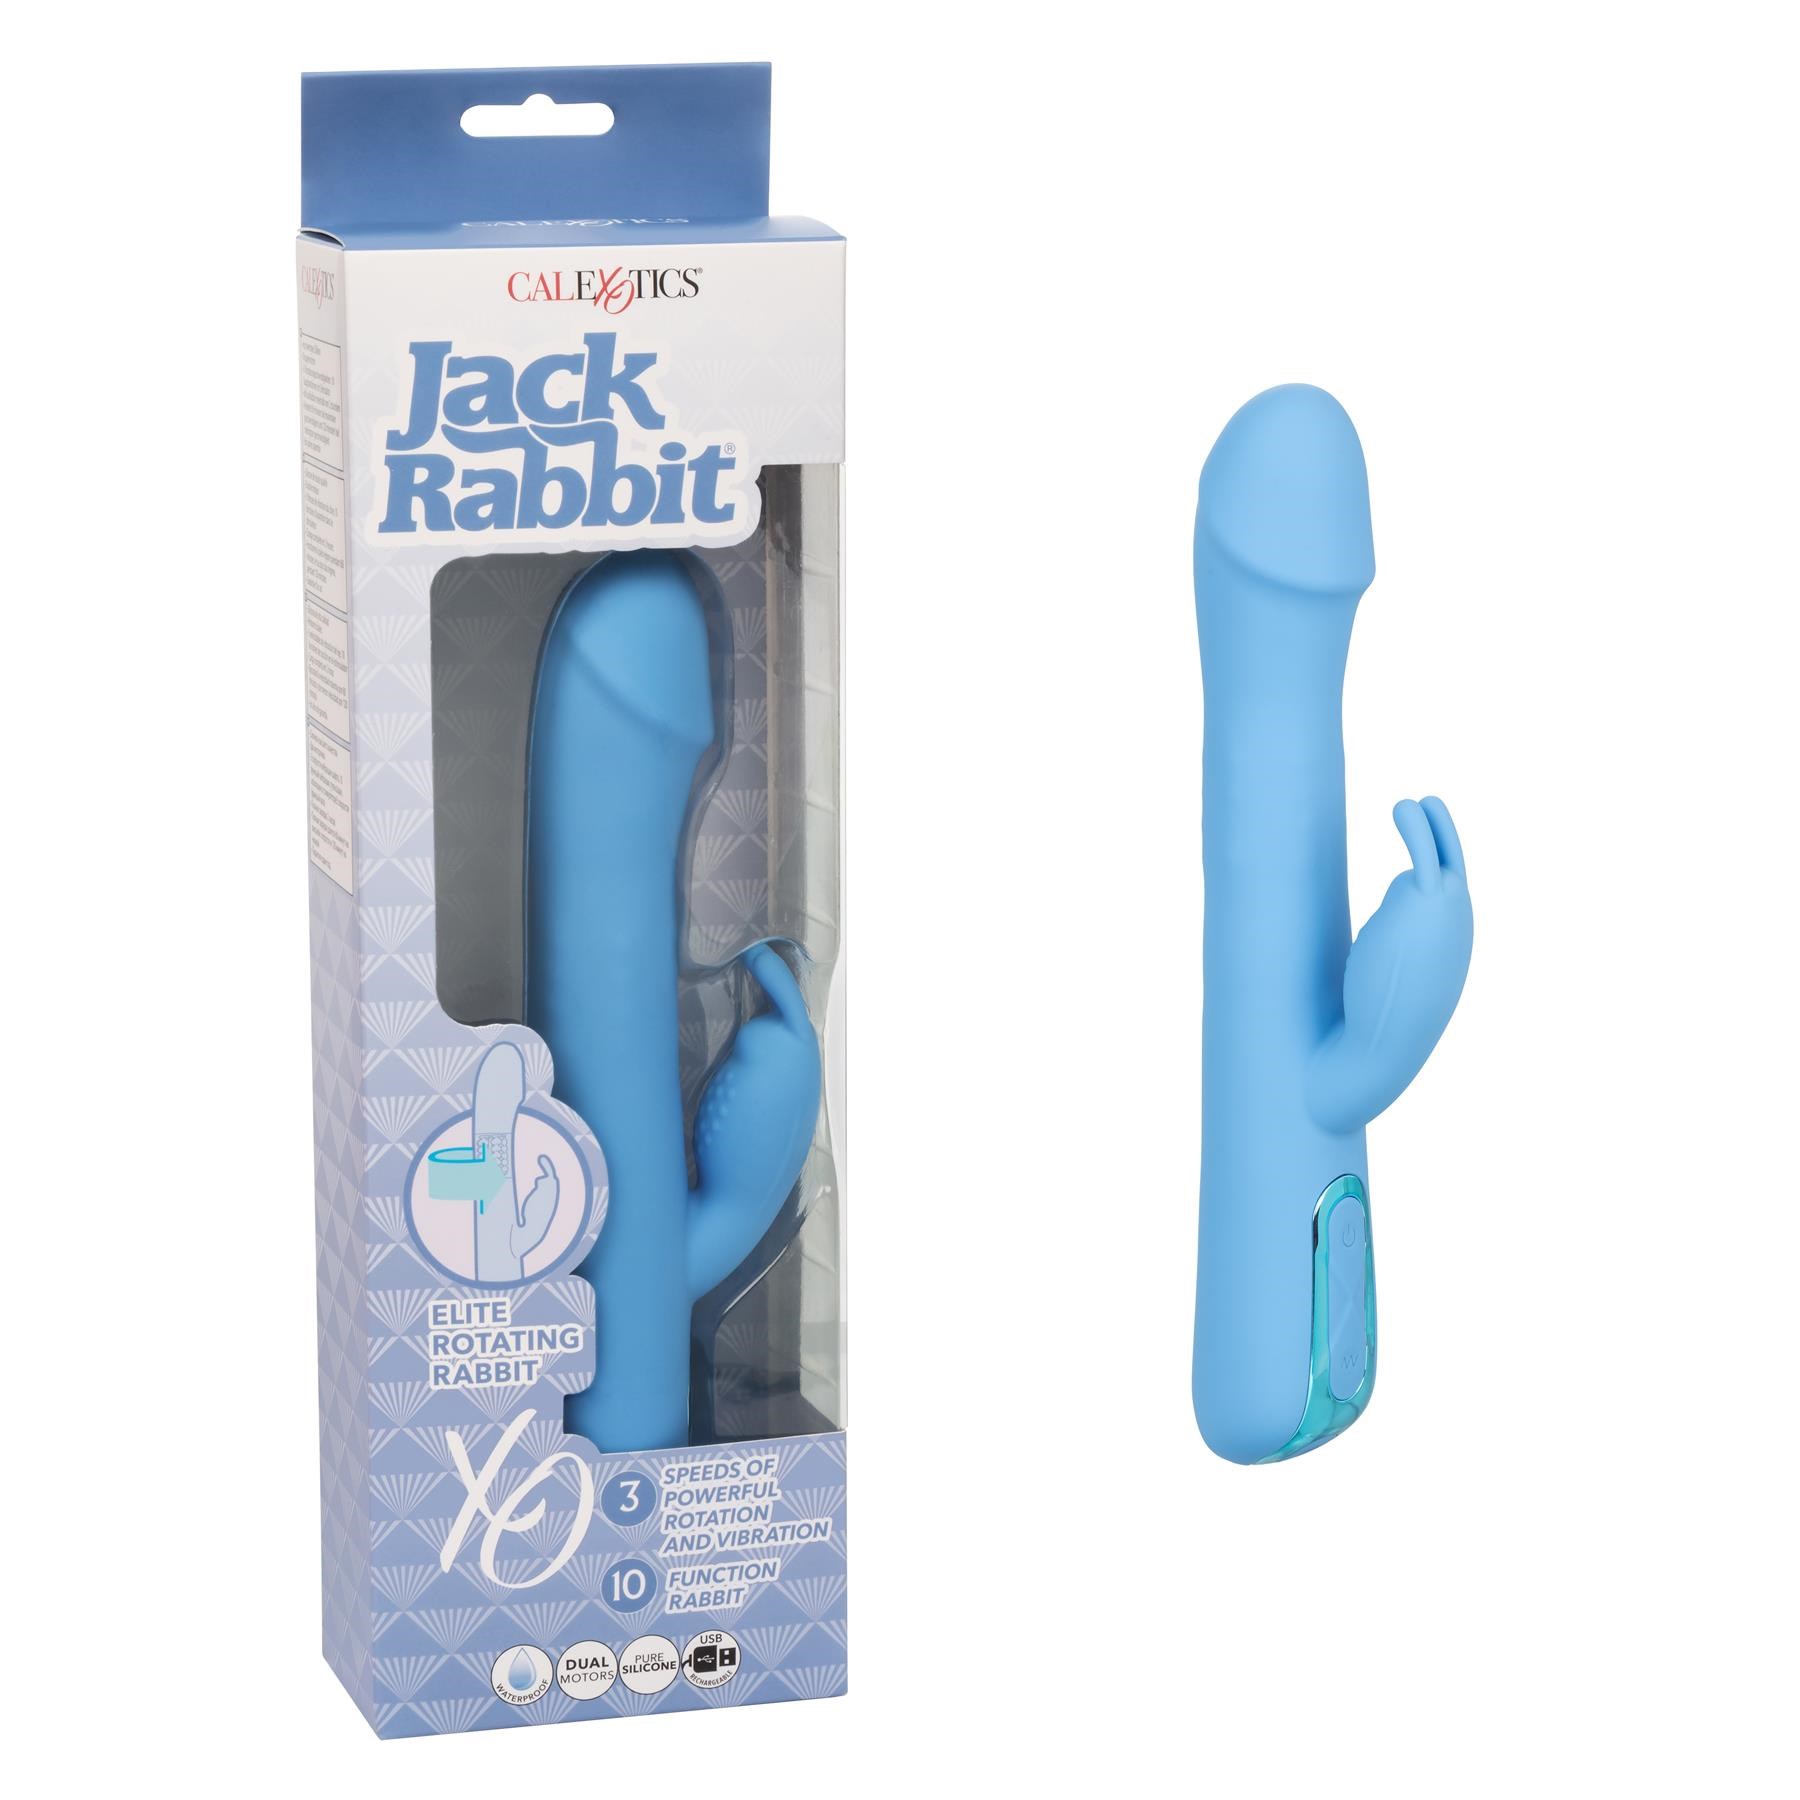 Jack Rabbit Elite Rotating Rabbit- Product and Packaging